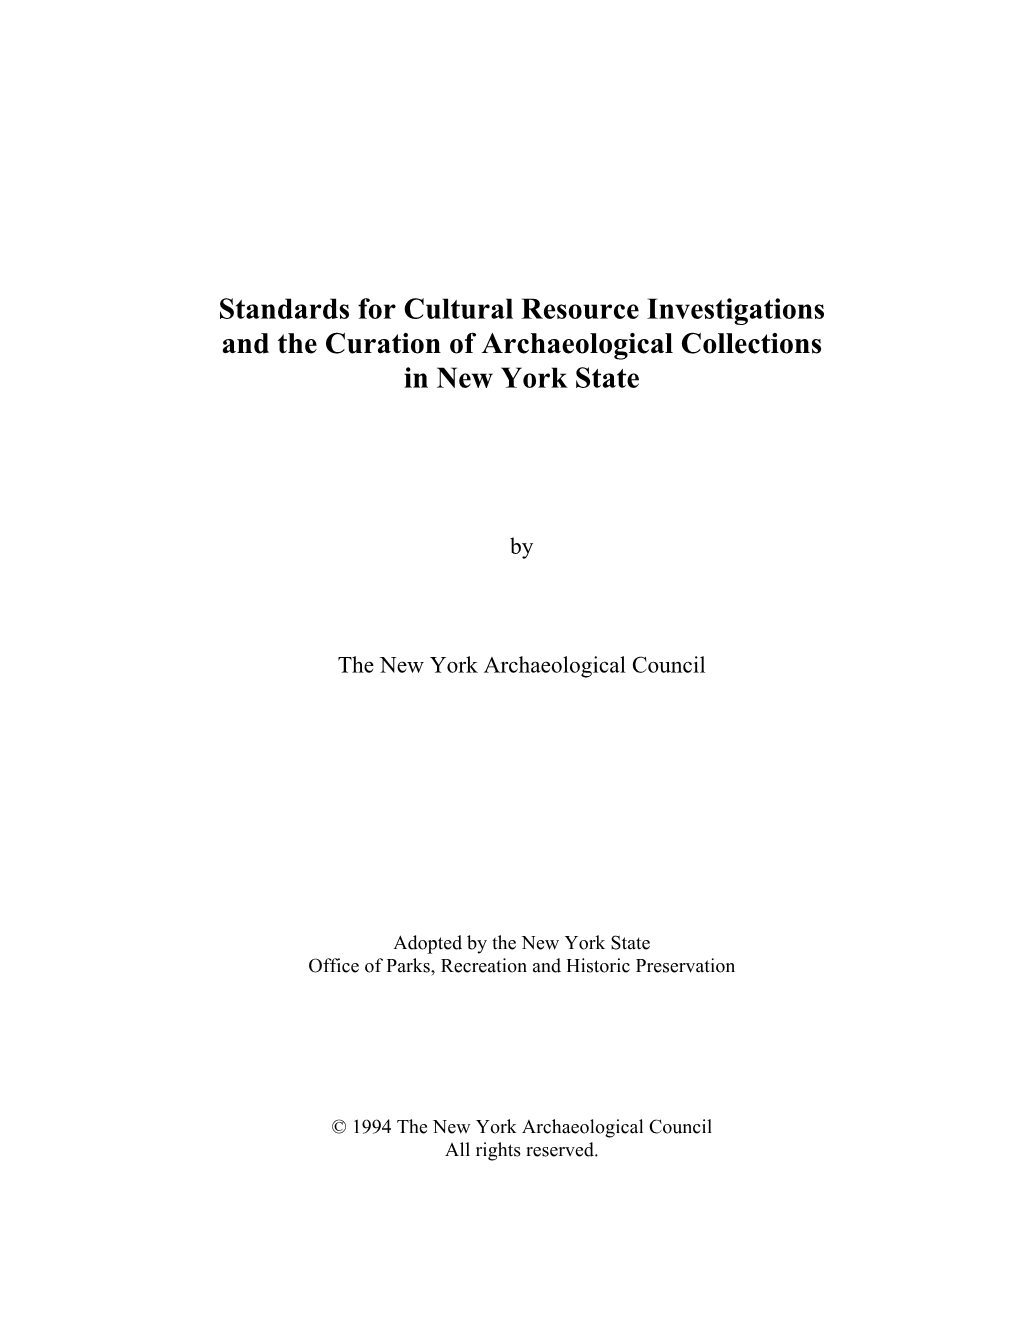 Standards for Cultural Resource Investigations and the Curation of Archaeological Collections in New York State